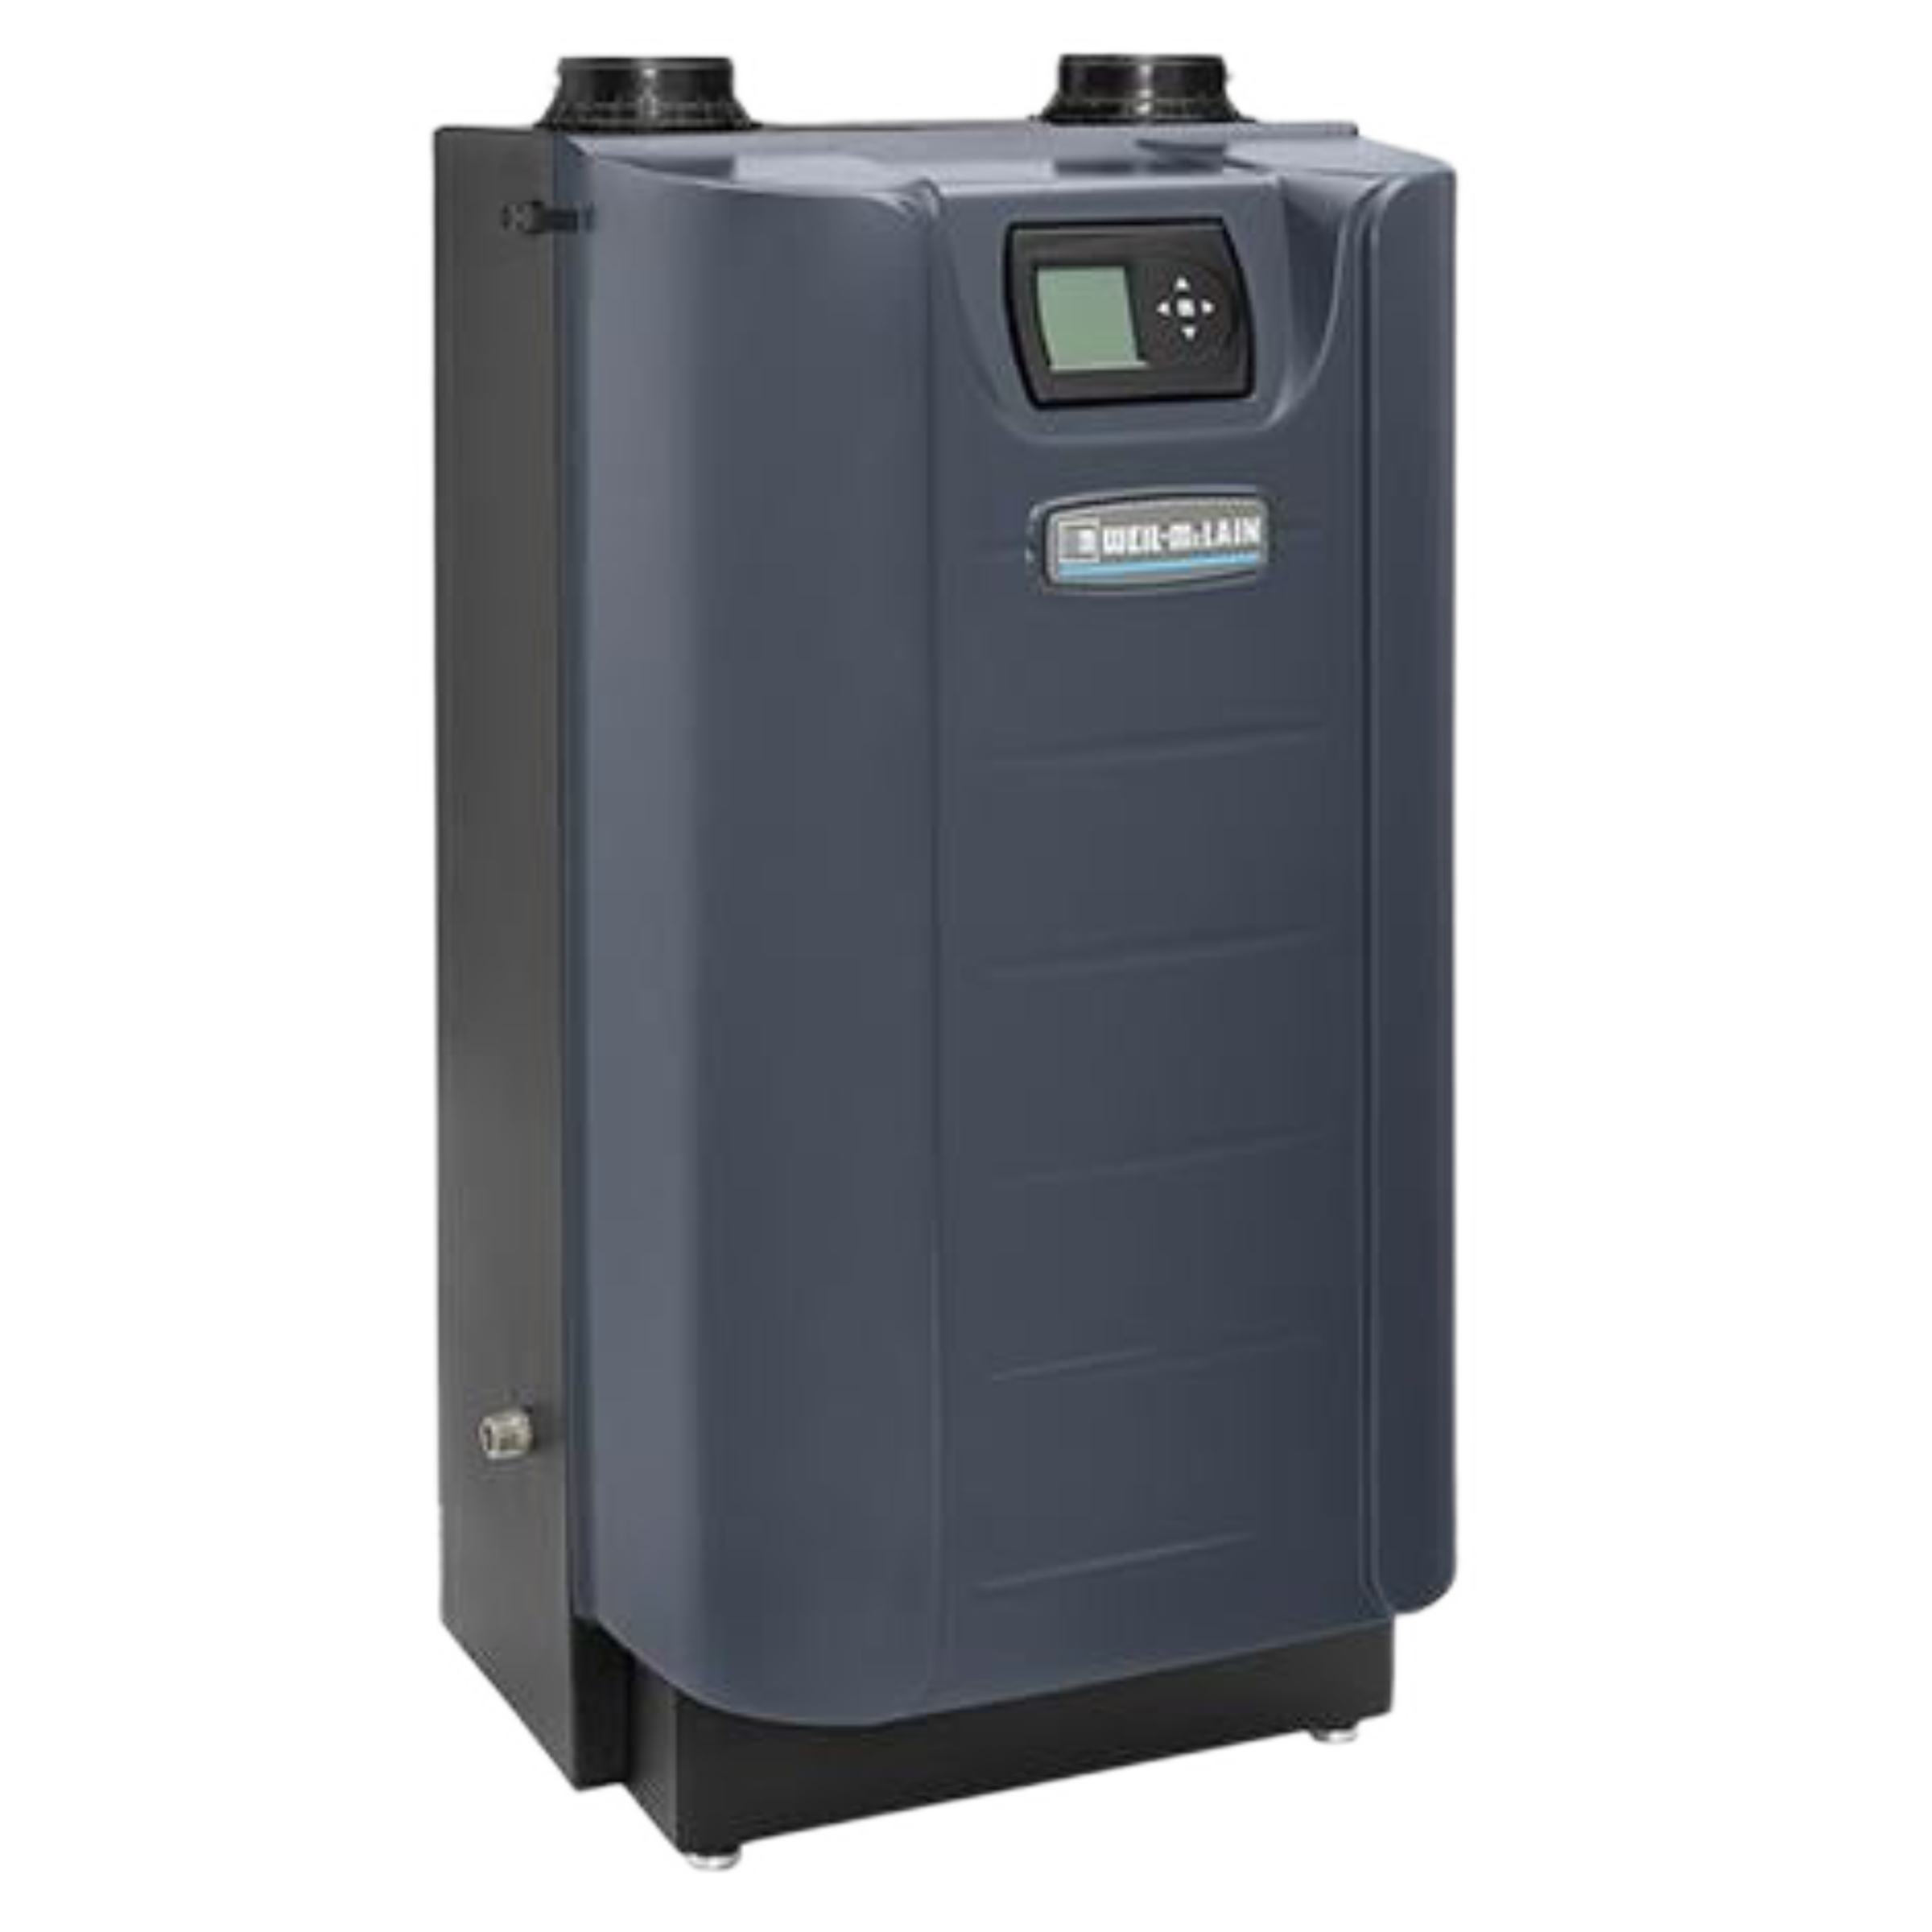 EVG-299 Weil Mclain Evergreen Pro Sereis Natural Gas High-Efficiency Condensing Boiler 299,000 BTU 95.0% AFUE 7.0 GAL for Residential
and Light-Commercial Use, Energy Star Qualified